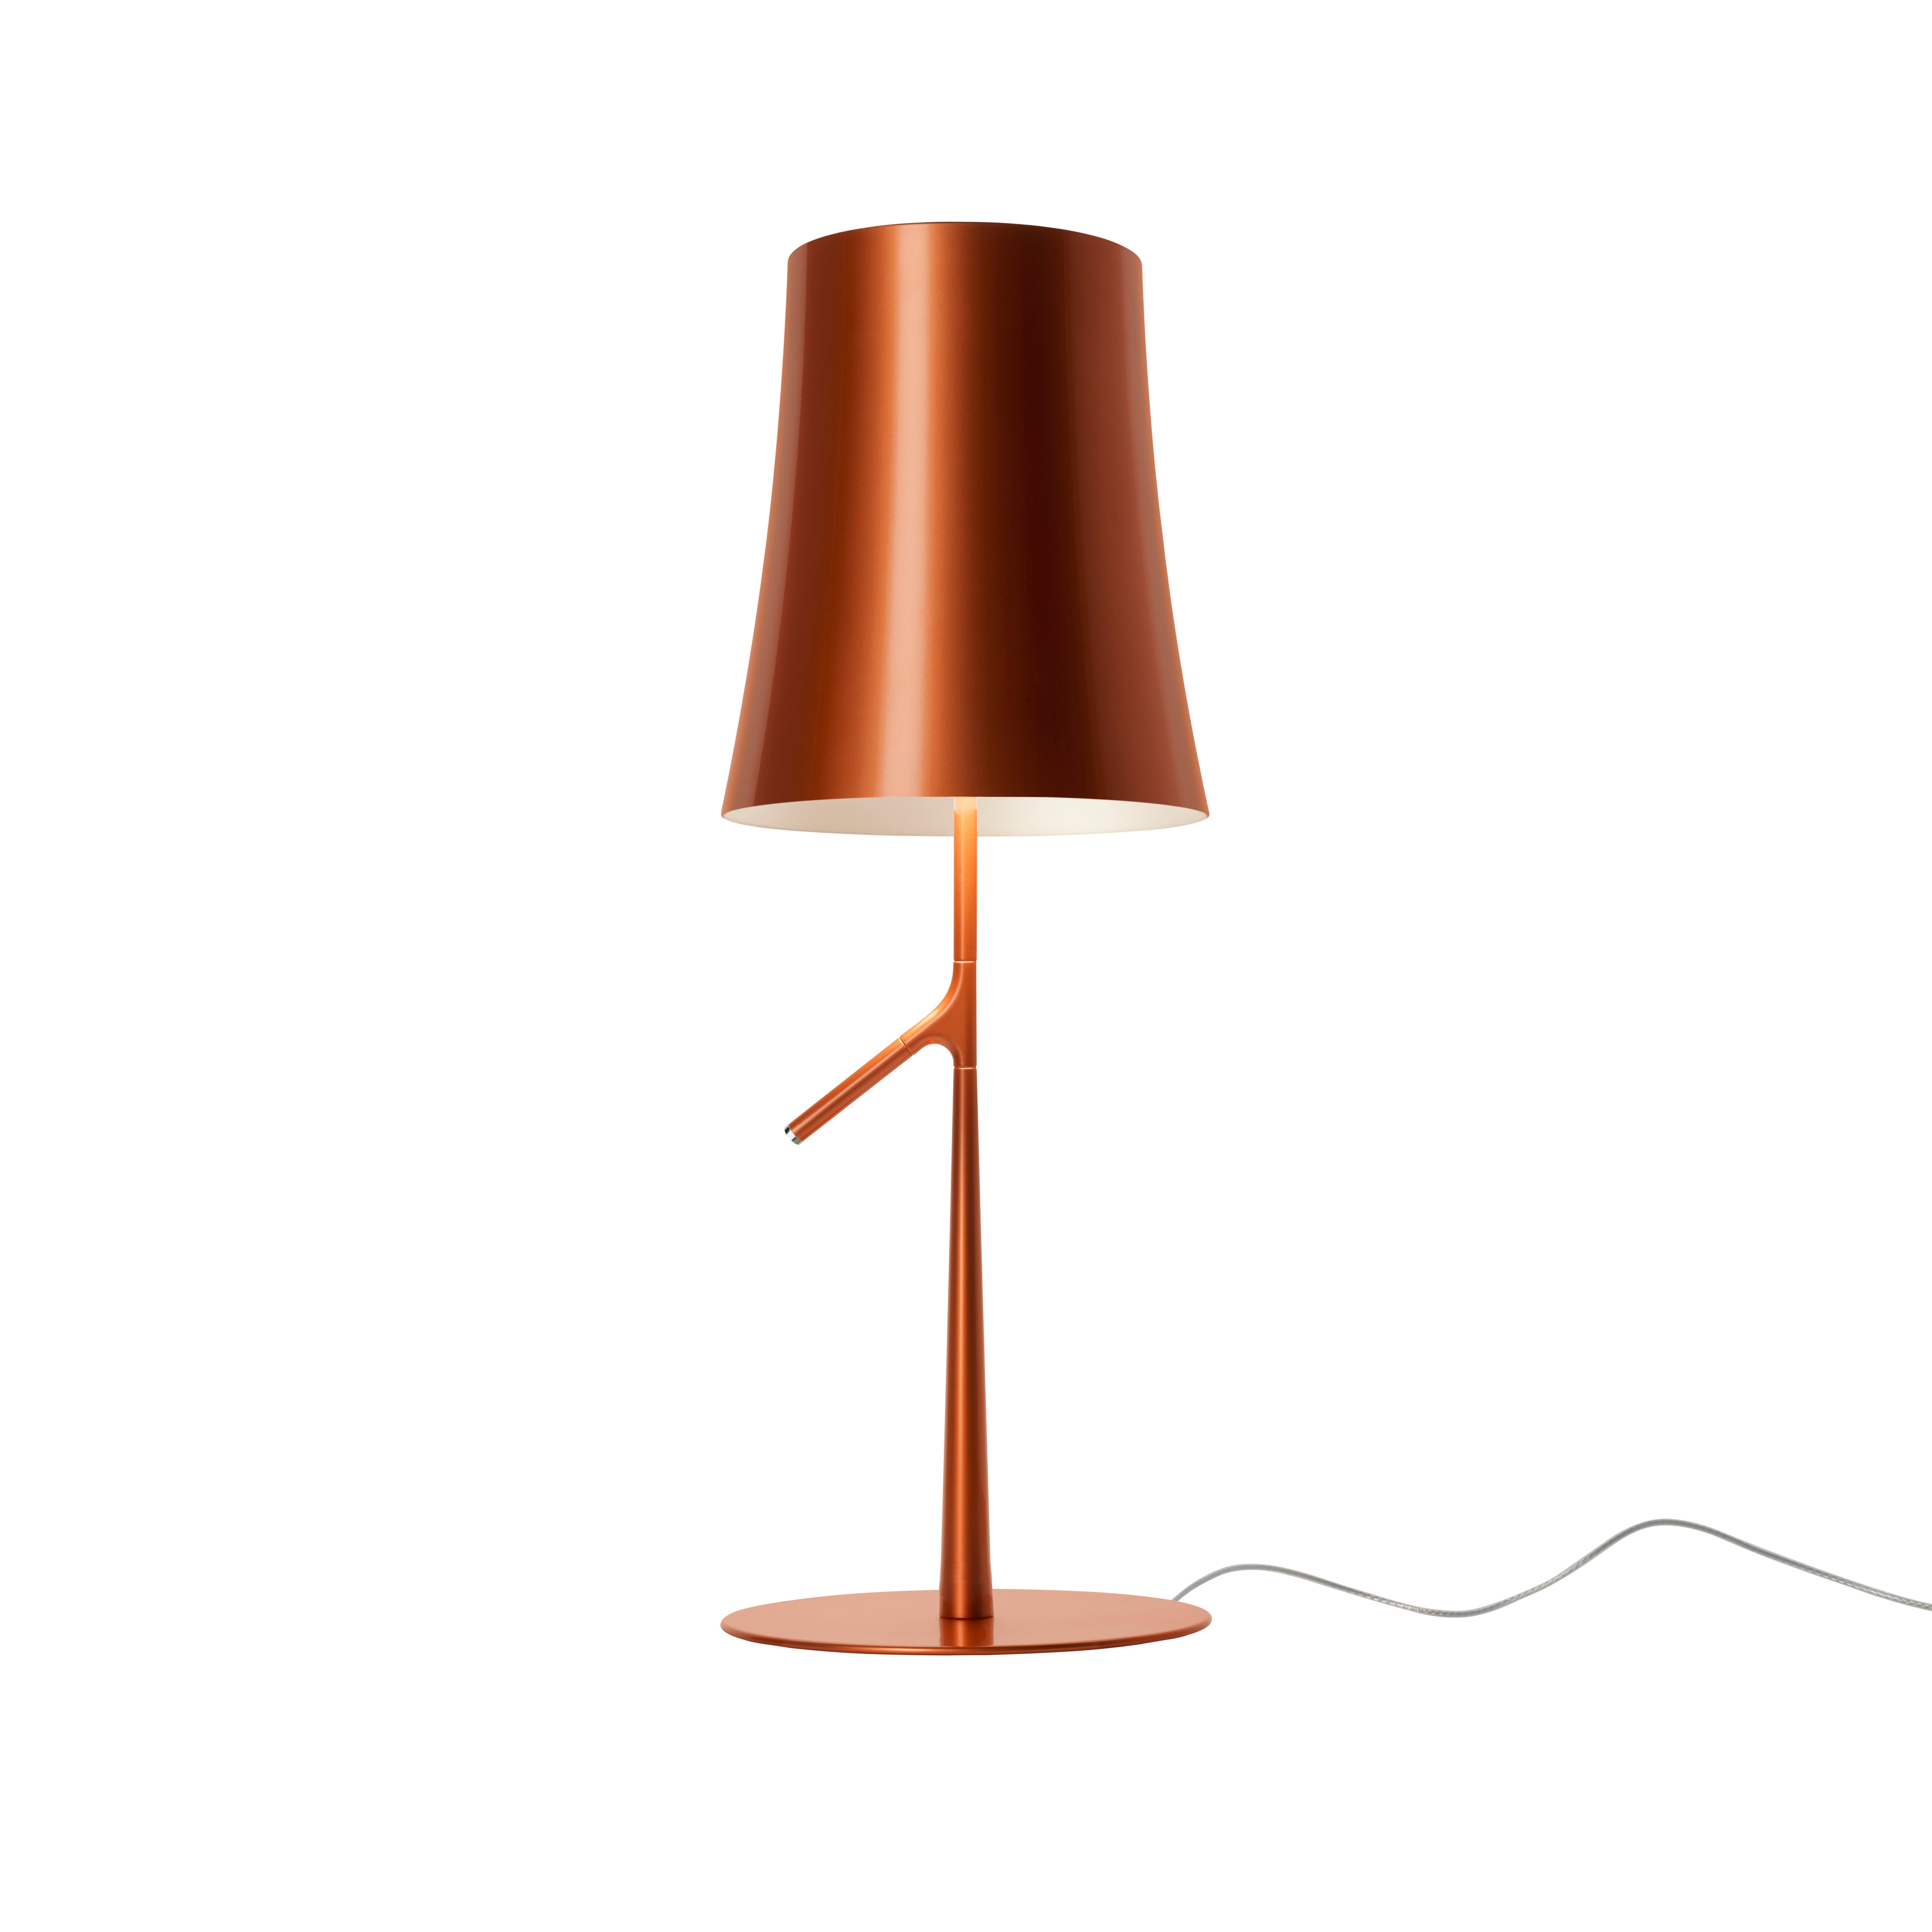 Foscarini Large Dimmable Birdie Table Lamp in Copper, Ludovica & Roberto Palomba For Sale